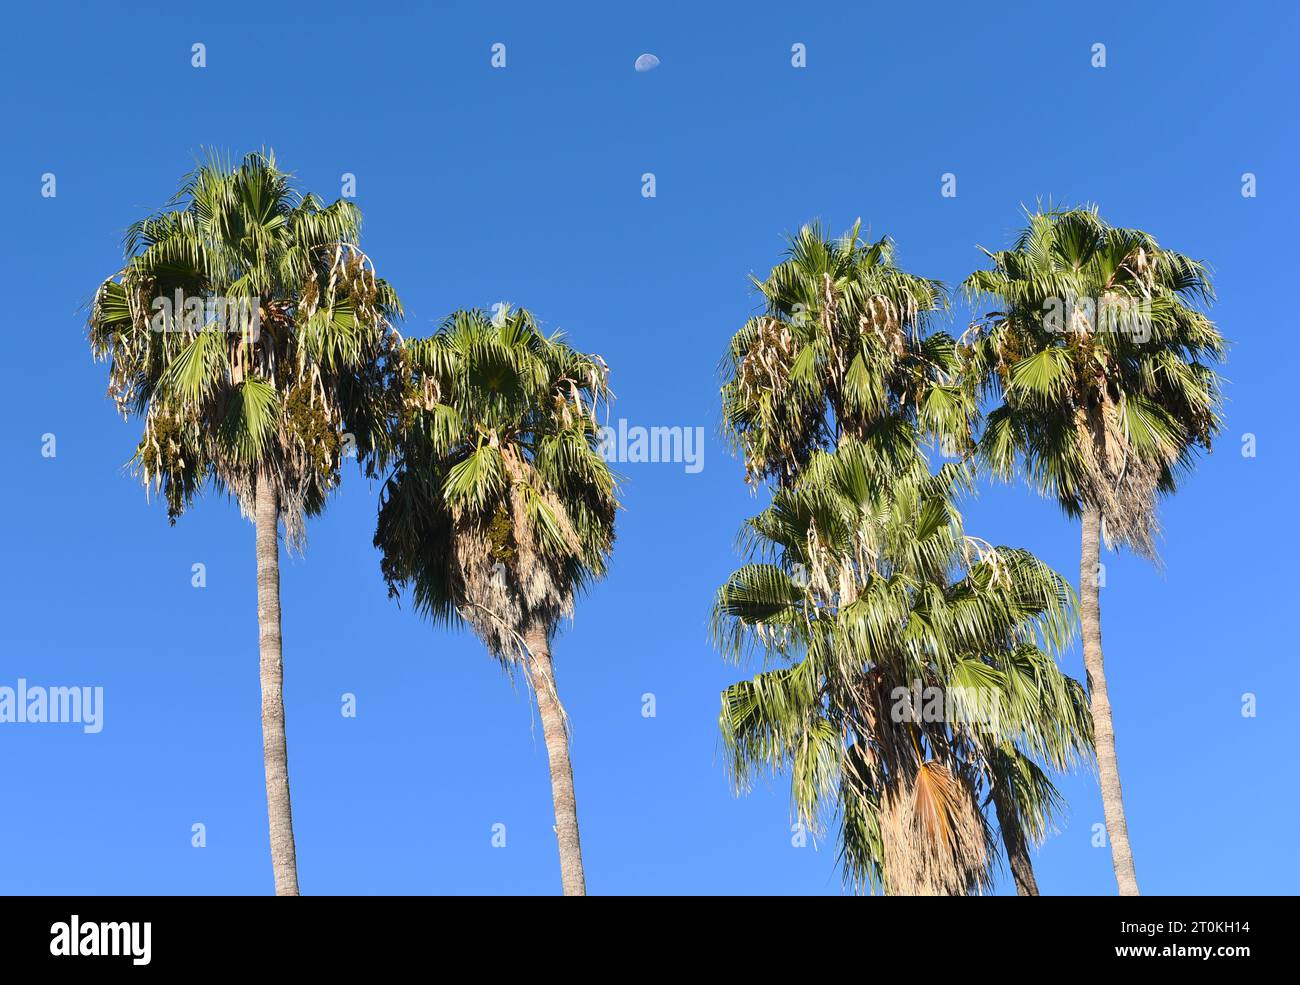 Moon and Palm Trees against a bright blue sky Stock Photo